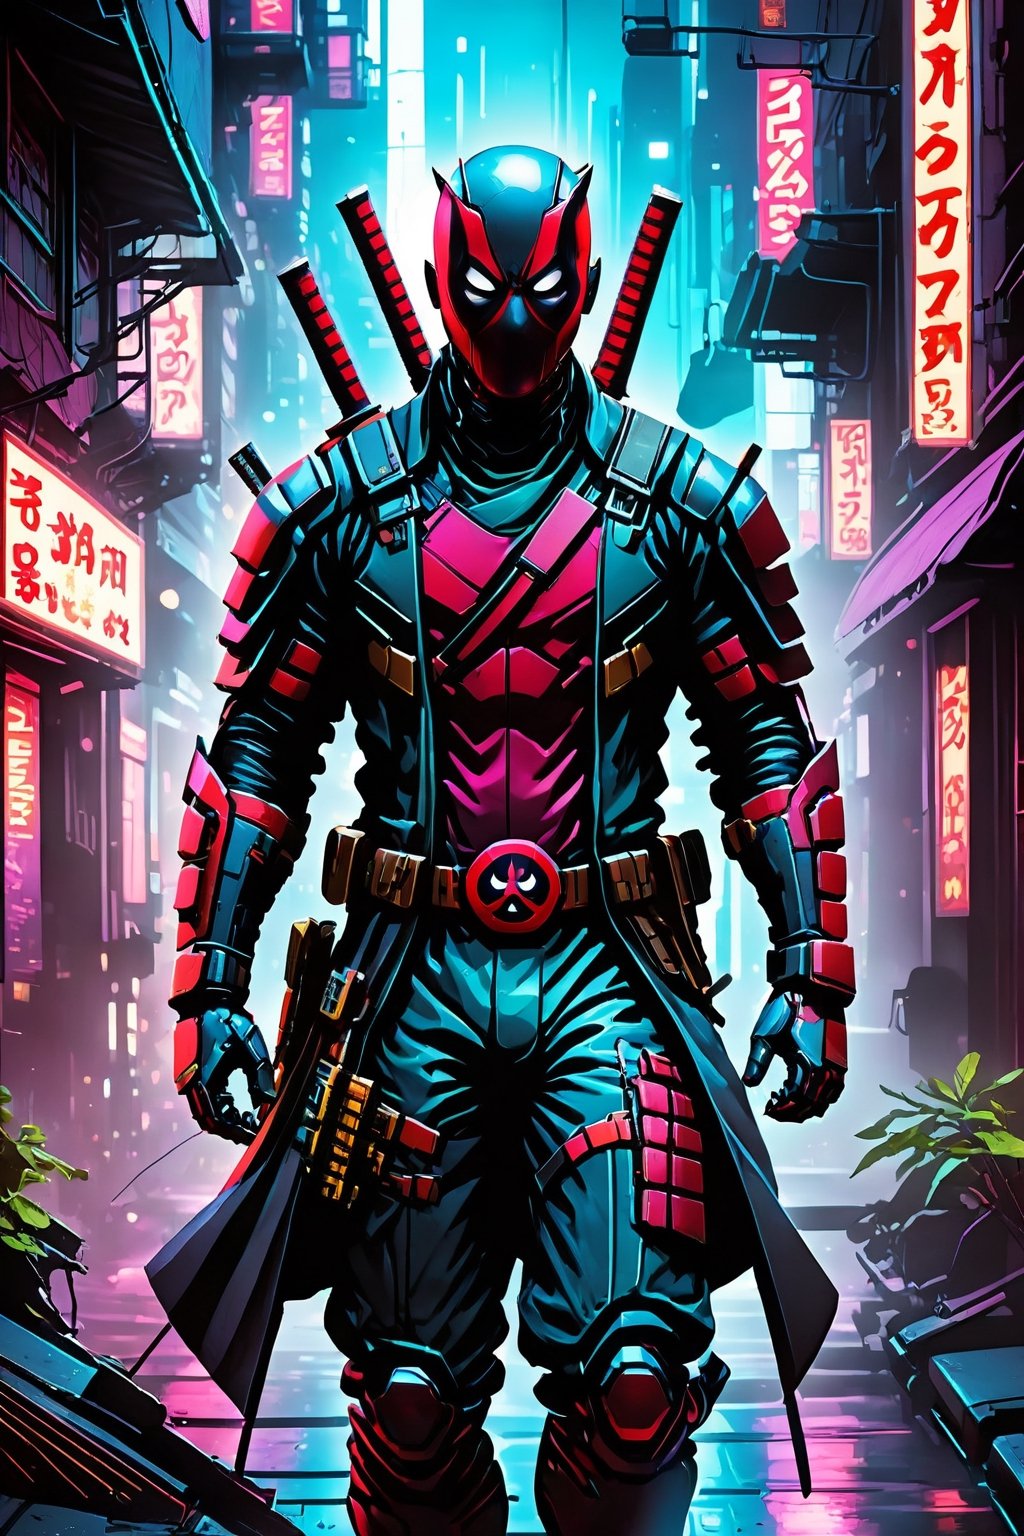 Deadpool, from the Marvel comics, can be imagined in a dystopian urban setting, where a cybernetically enhanced street is adorned with high-tech armor. He strides through neon-lit alleys, casting a cascade of shadows and vibrant light on his gleaming blades and cybernetic implants. This creates a silhouette that defines a modern warrior. The contrast between traditional samurai aesthetics and futuristic cyberpunk elements creates a visual narrative that captures the resilience and adaptability of a modern superhero amidst the chaos of a metropolis. The prompt invites us to create a hyper-realistic image of a street samurai, navigating the gritty streets and symbolizing the coexistence of tradition and technology.